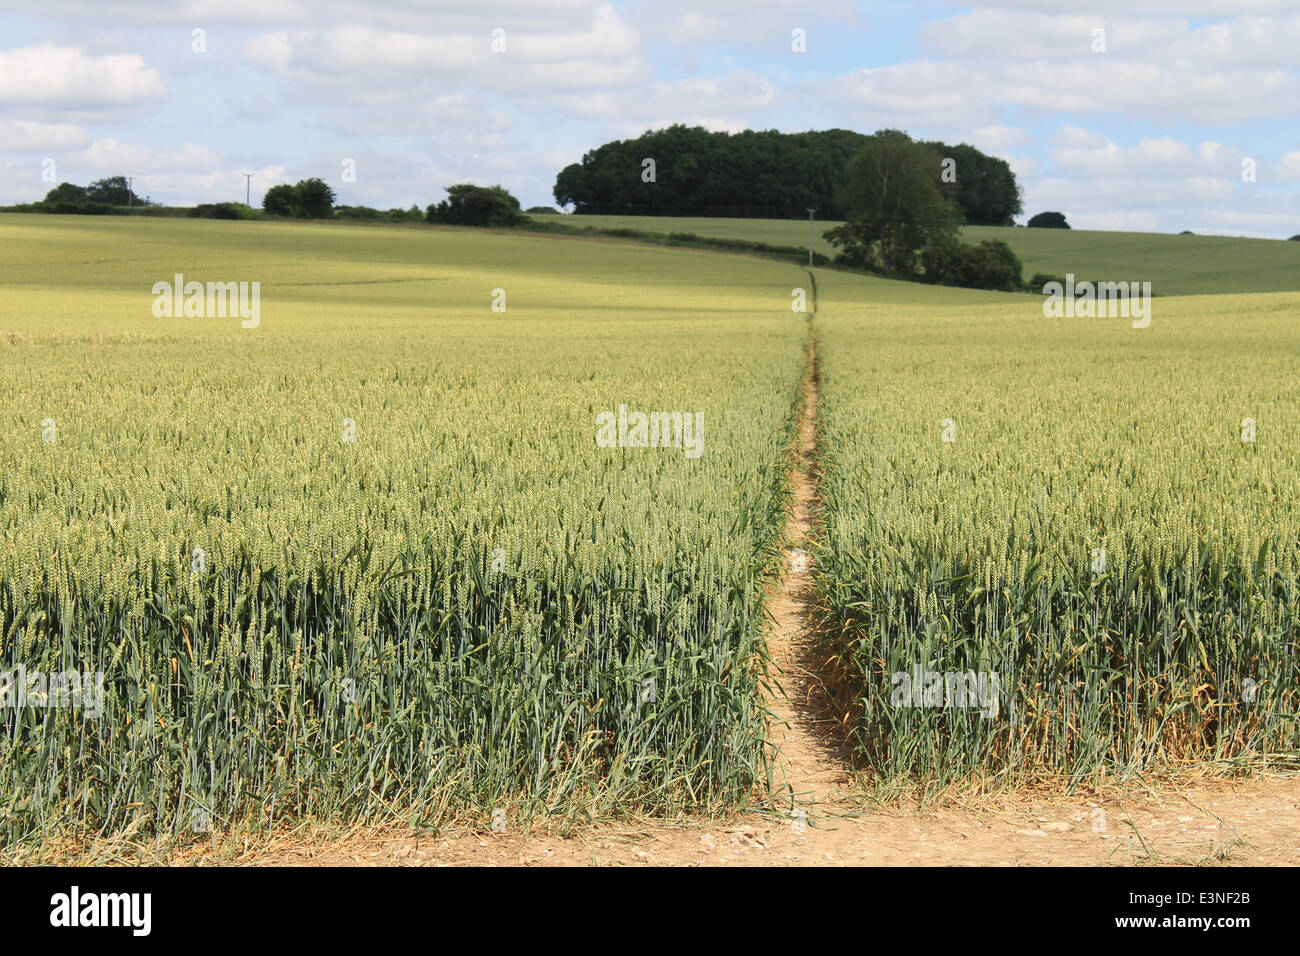 The Wayfarer's Way crosses a wheat field on the outskirts of Denmead, Hampshire, UK Stock Photo